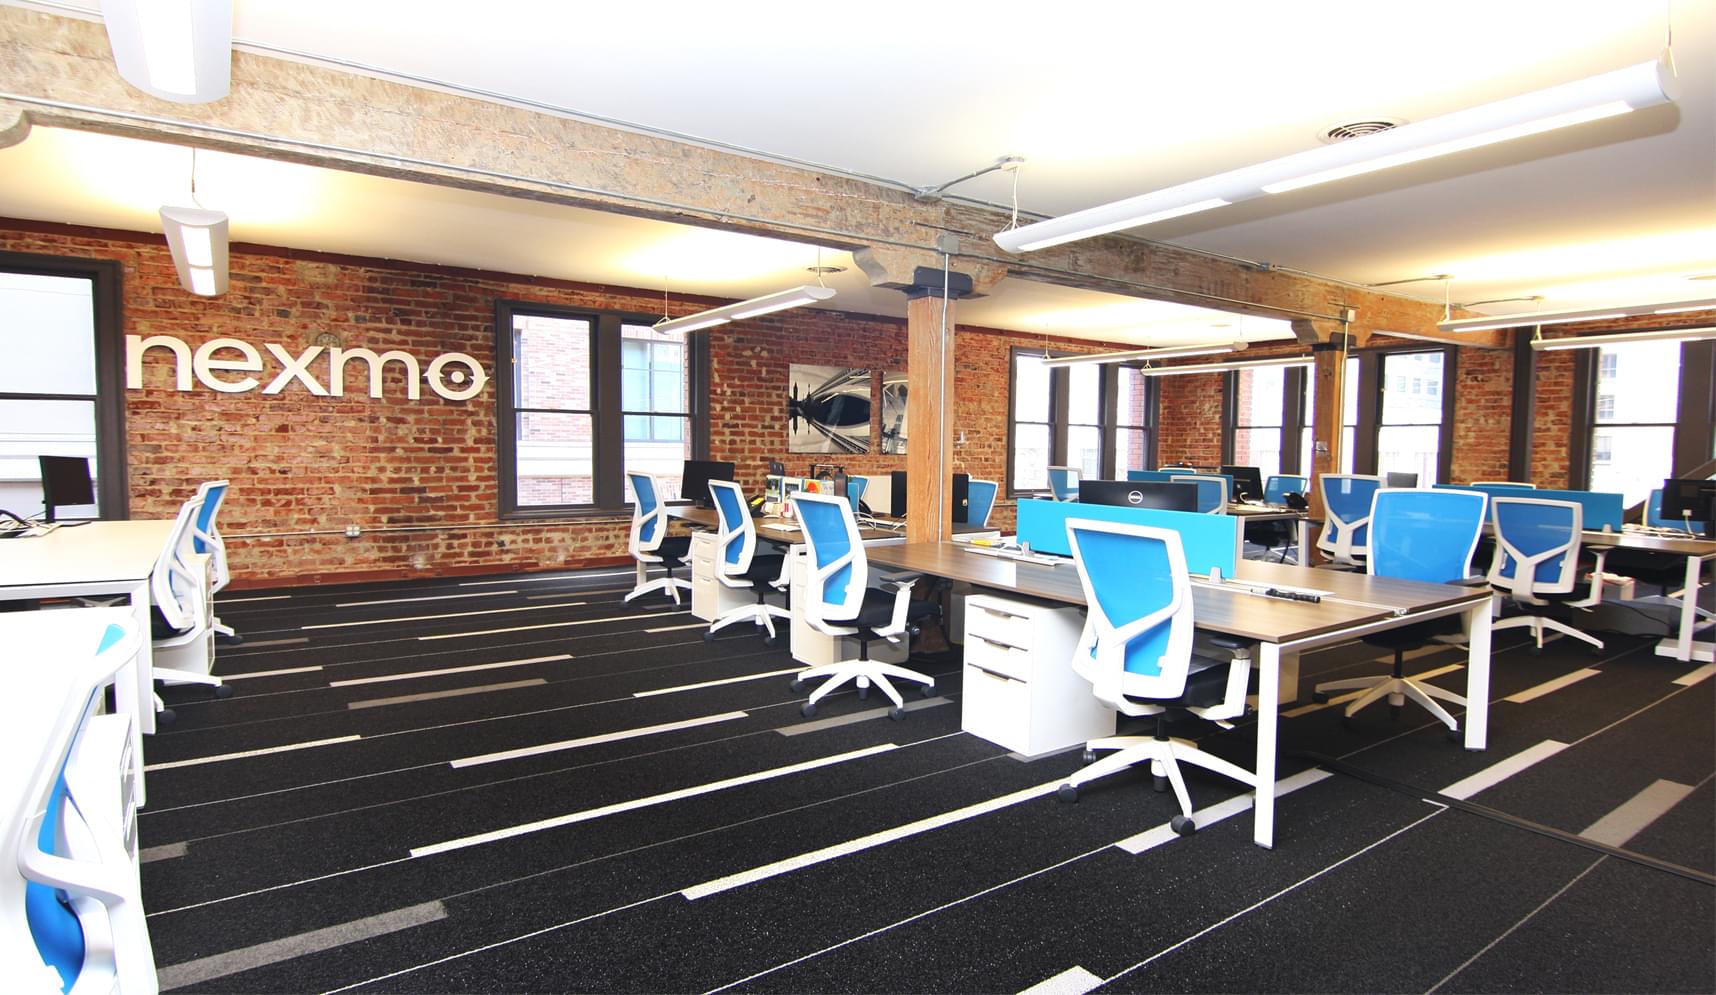 Vonage Acquires Nexmo to Accelerate Cloud Communications Growth